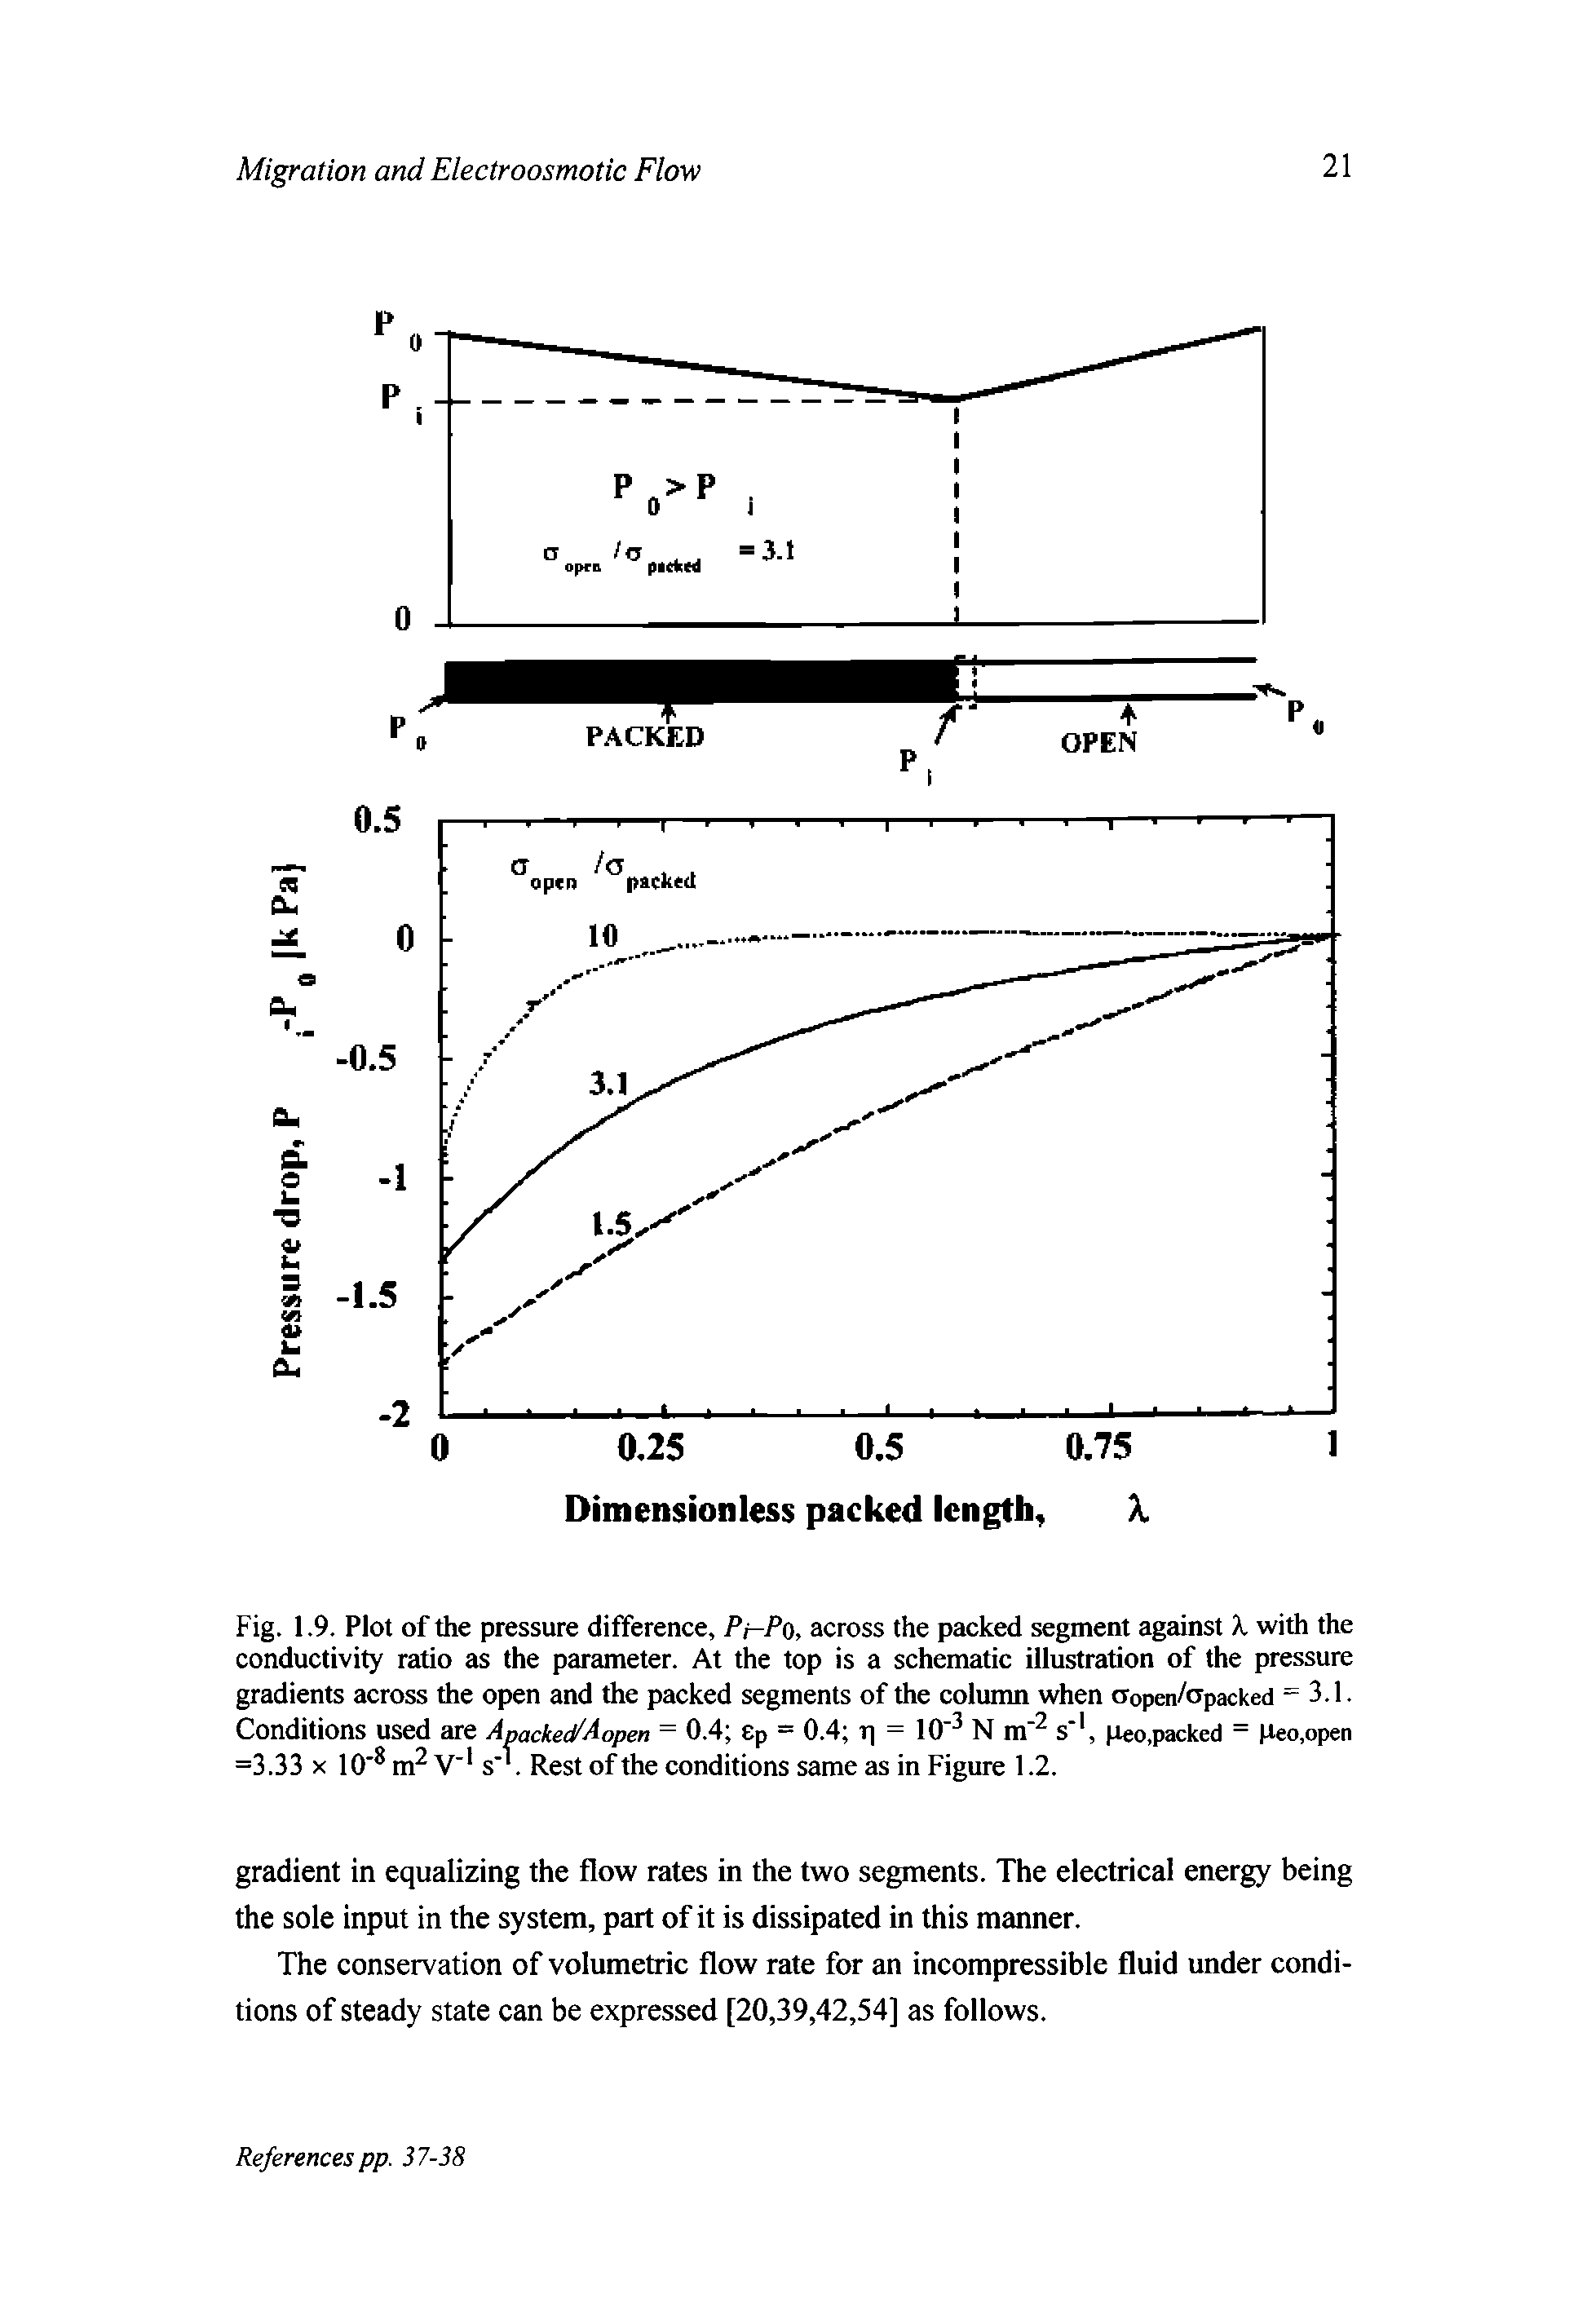 Fig. 1.9. Plot of the pressure difference, Pj-Po, across the packed segment against X with the conductivity ratio as the parameter. At the top is a schematic illustration of the pressure gradients across the open and the packed segments of the column when ffopen/crpacked = 3.1. Conditions used are Apacked/Aopen = 0.4 ep = 0.4 r = 10"3 N m"2 s 1, peo,packed = peo.open =3.33 x 10 m2V" s. Rest of the conditions same as in Figure 1.2.